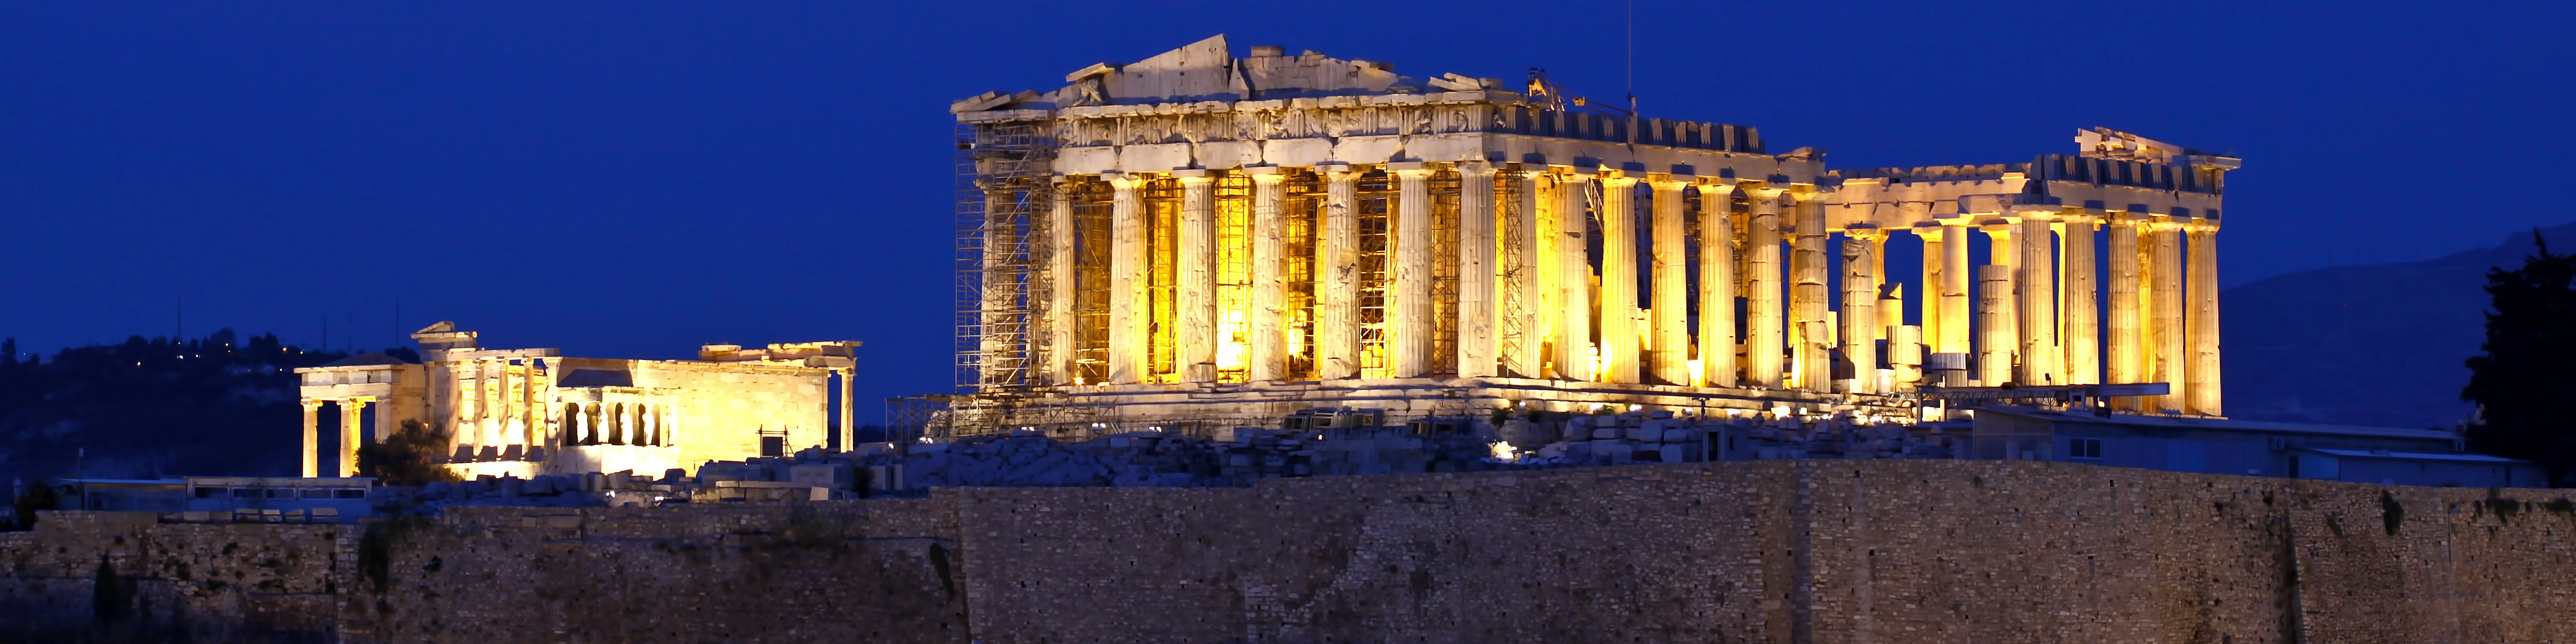 The Acropolis in Athens, Greece - a UNESCO World Heritage Site featuring ancient ruins and monuments such as the Parthenon and the Propylaea.